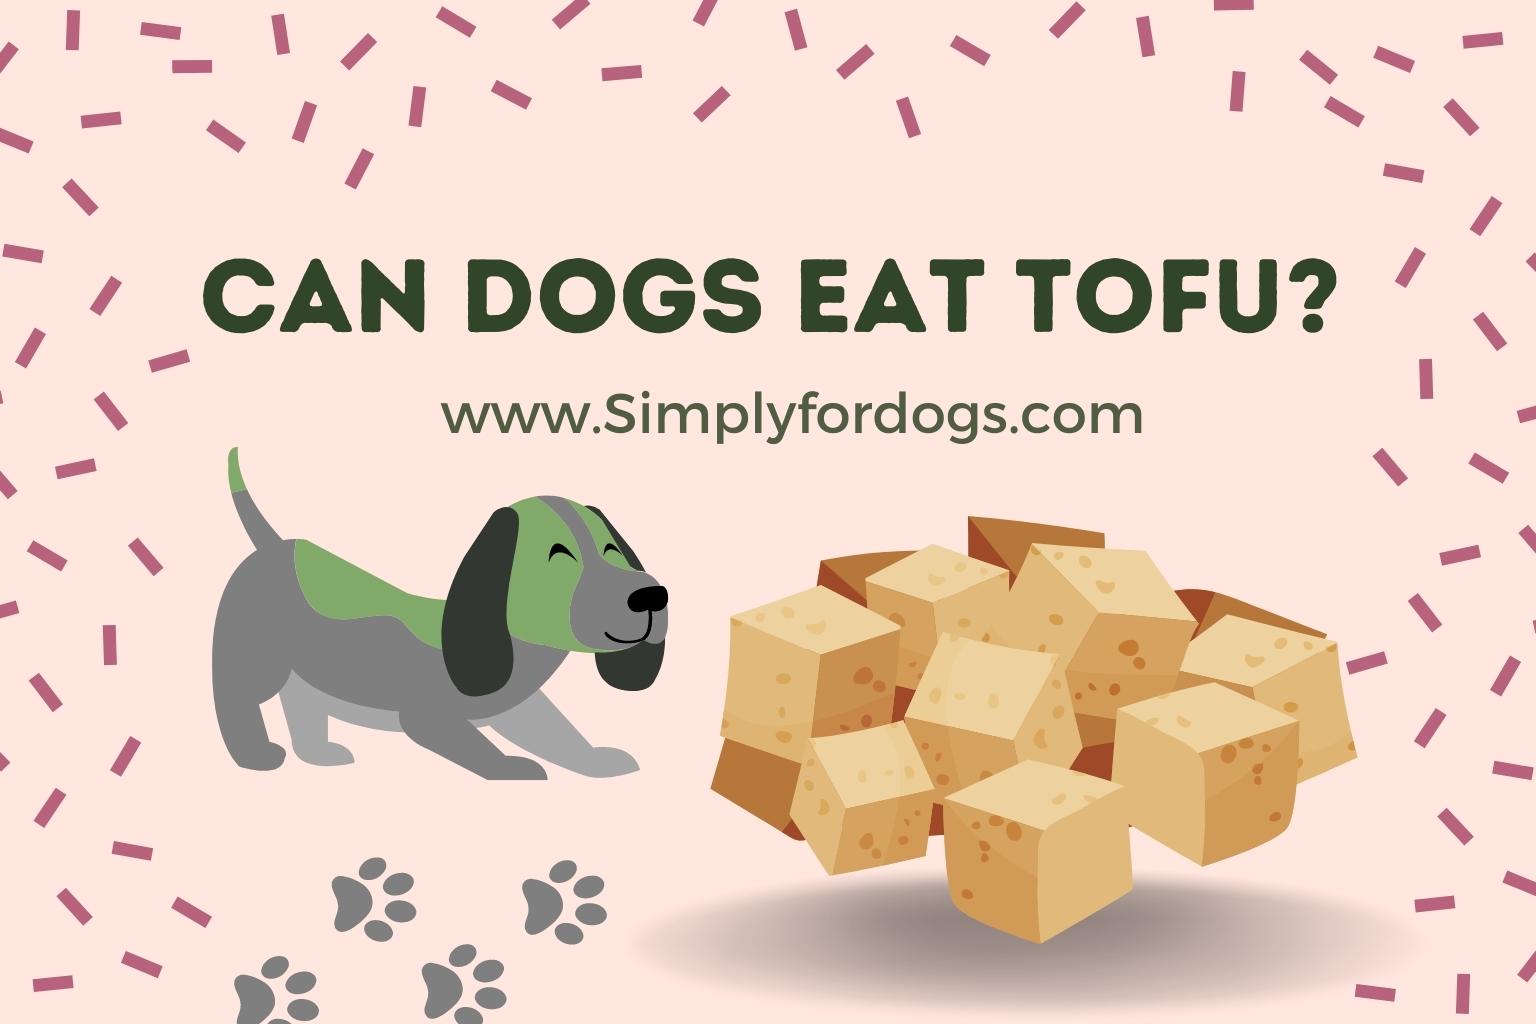 can-dogs-eat-tofu